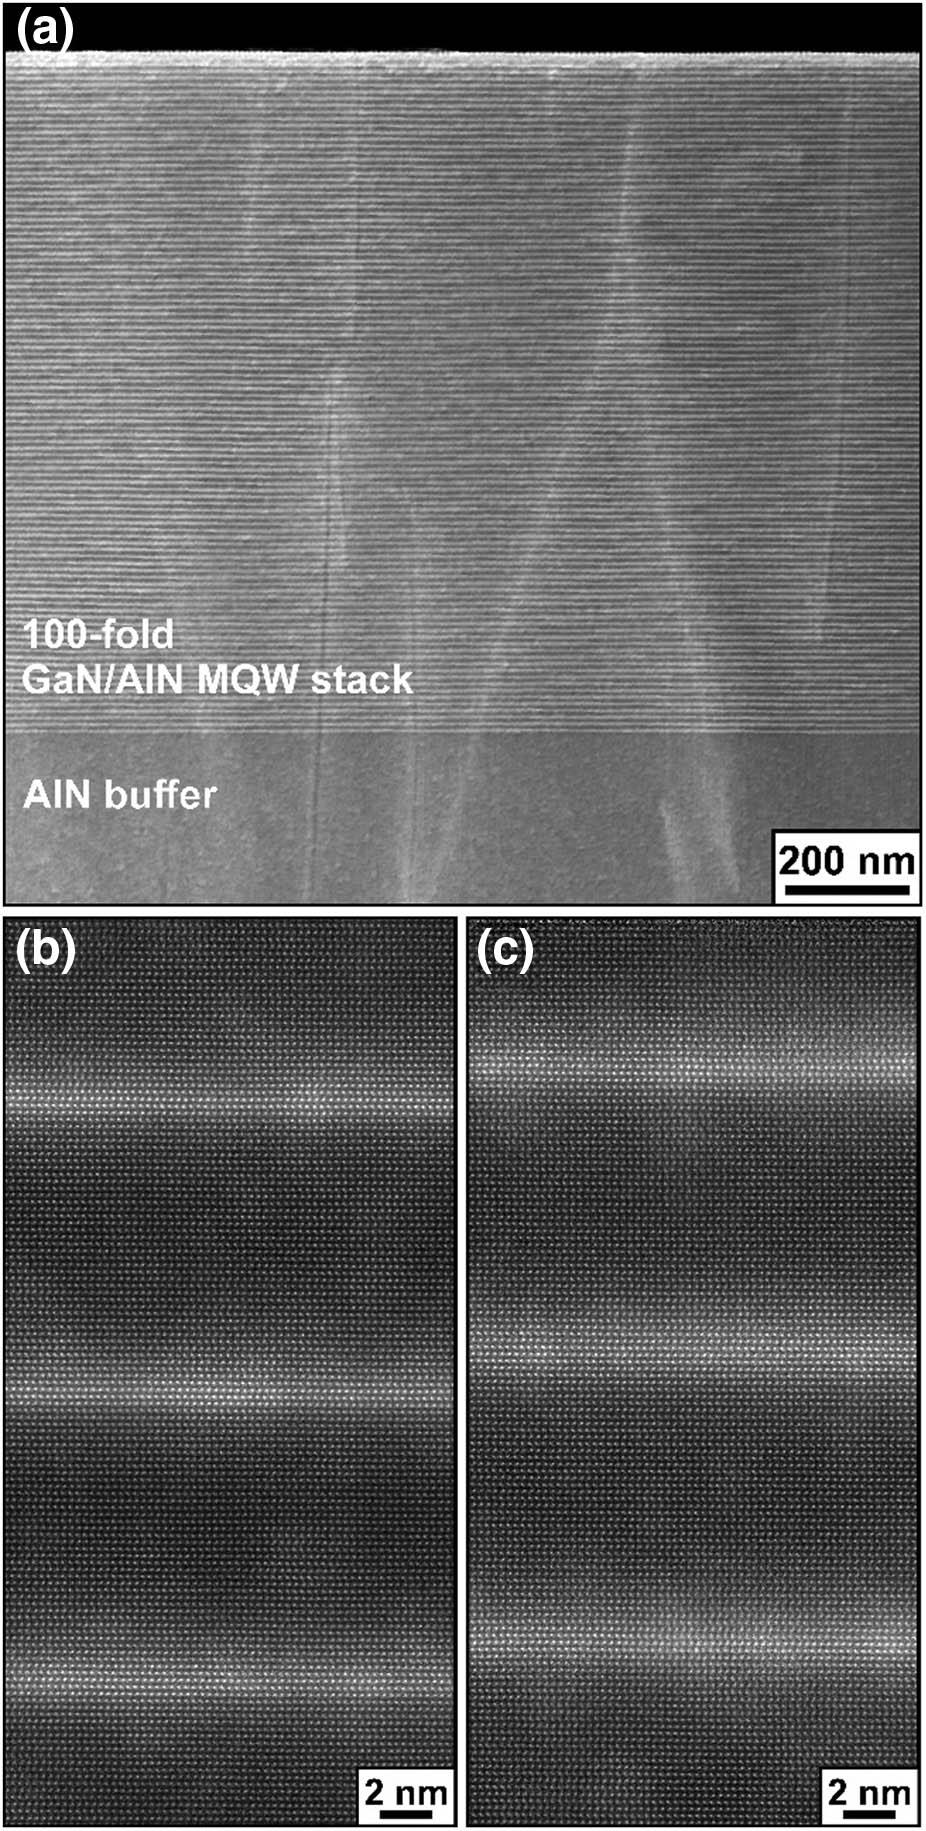 (a) STEM-HAADF image in cross-section view shows well-defined periodic structure of GaN/AlN MQWs grown on AlN buffer layer. High-resolution STEM-HAADF images taken from the (b) top and (c) bottom parts of a GaN QW stack indicate sharp interfaces. The bright (dark) contrast corresponds to GaN (AlN).